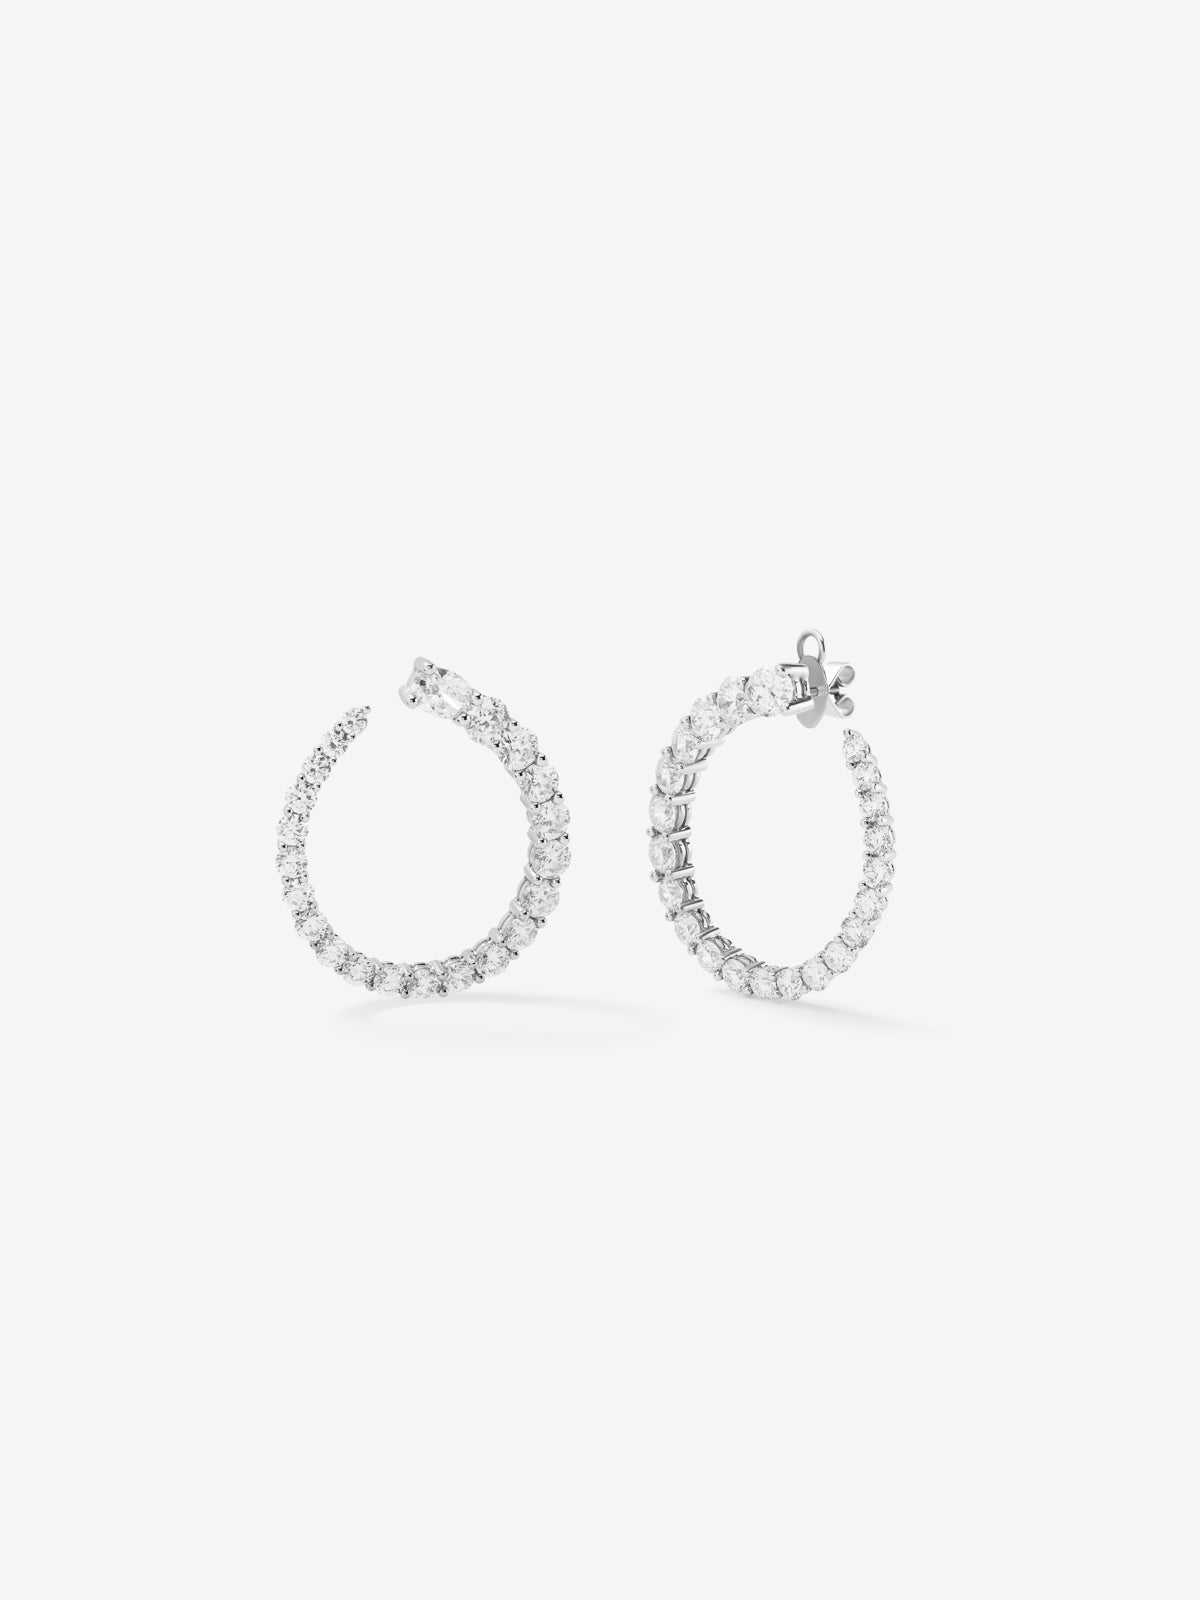 18K white gold hoop earrings with 26 brilliant-cut diamonds with a total of 5.13 cts